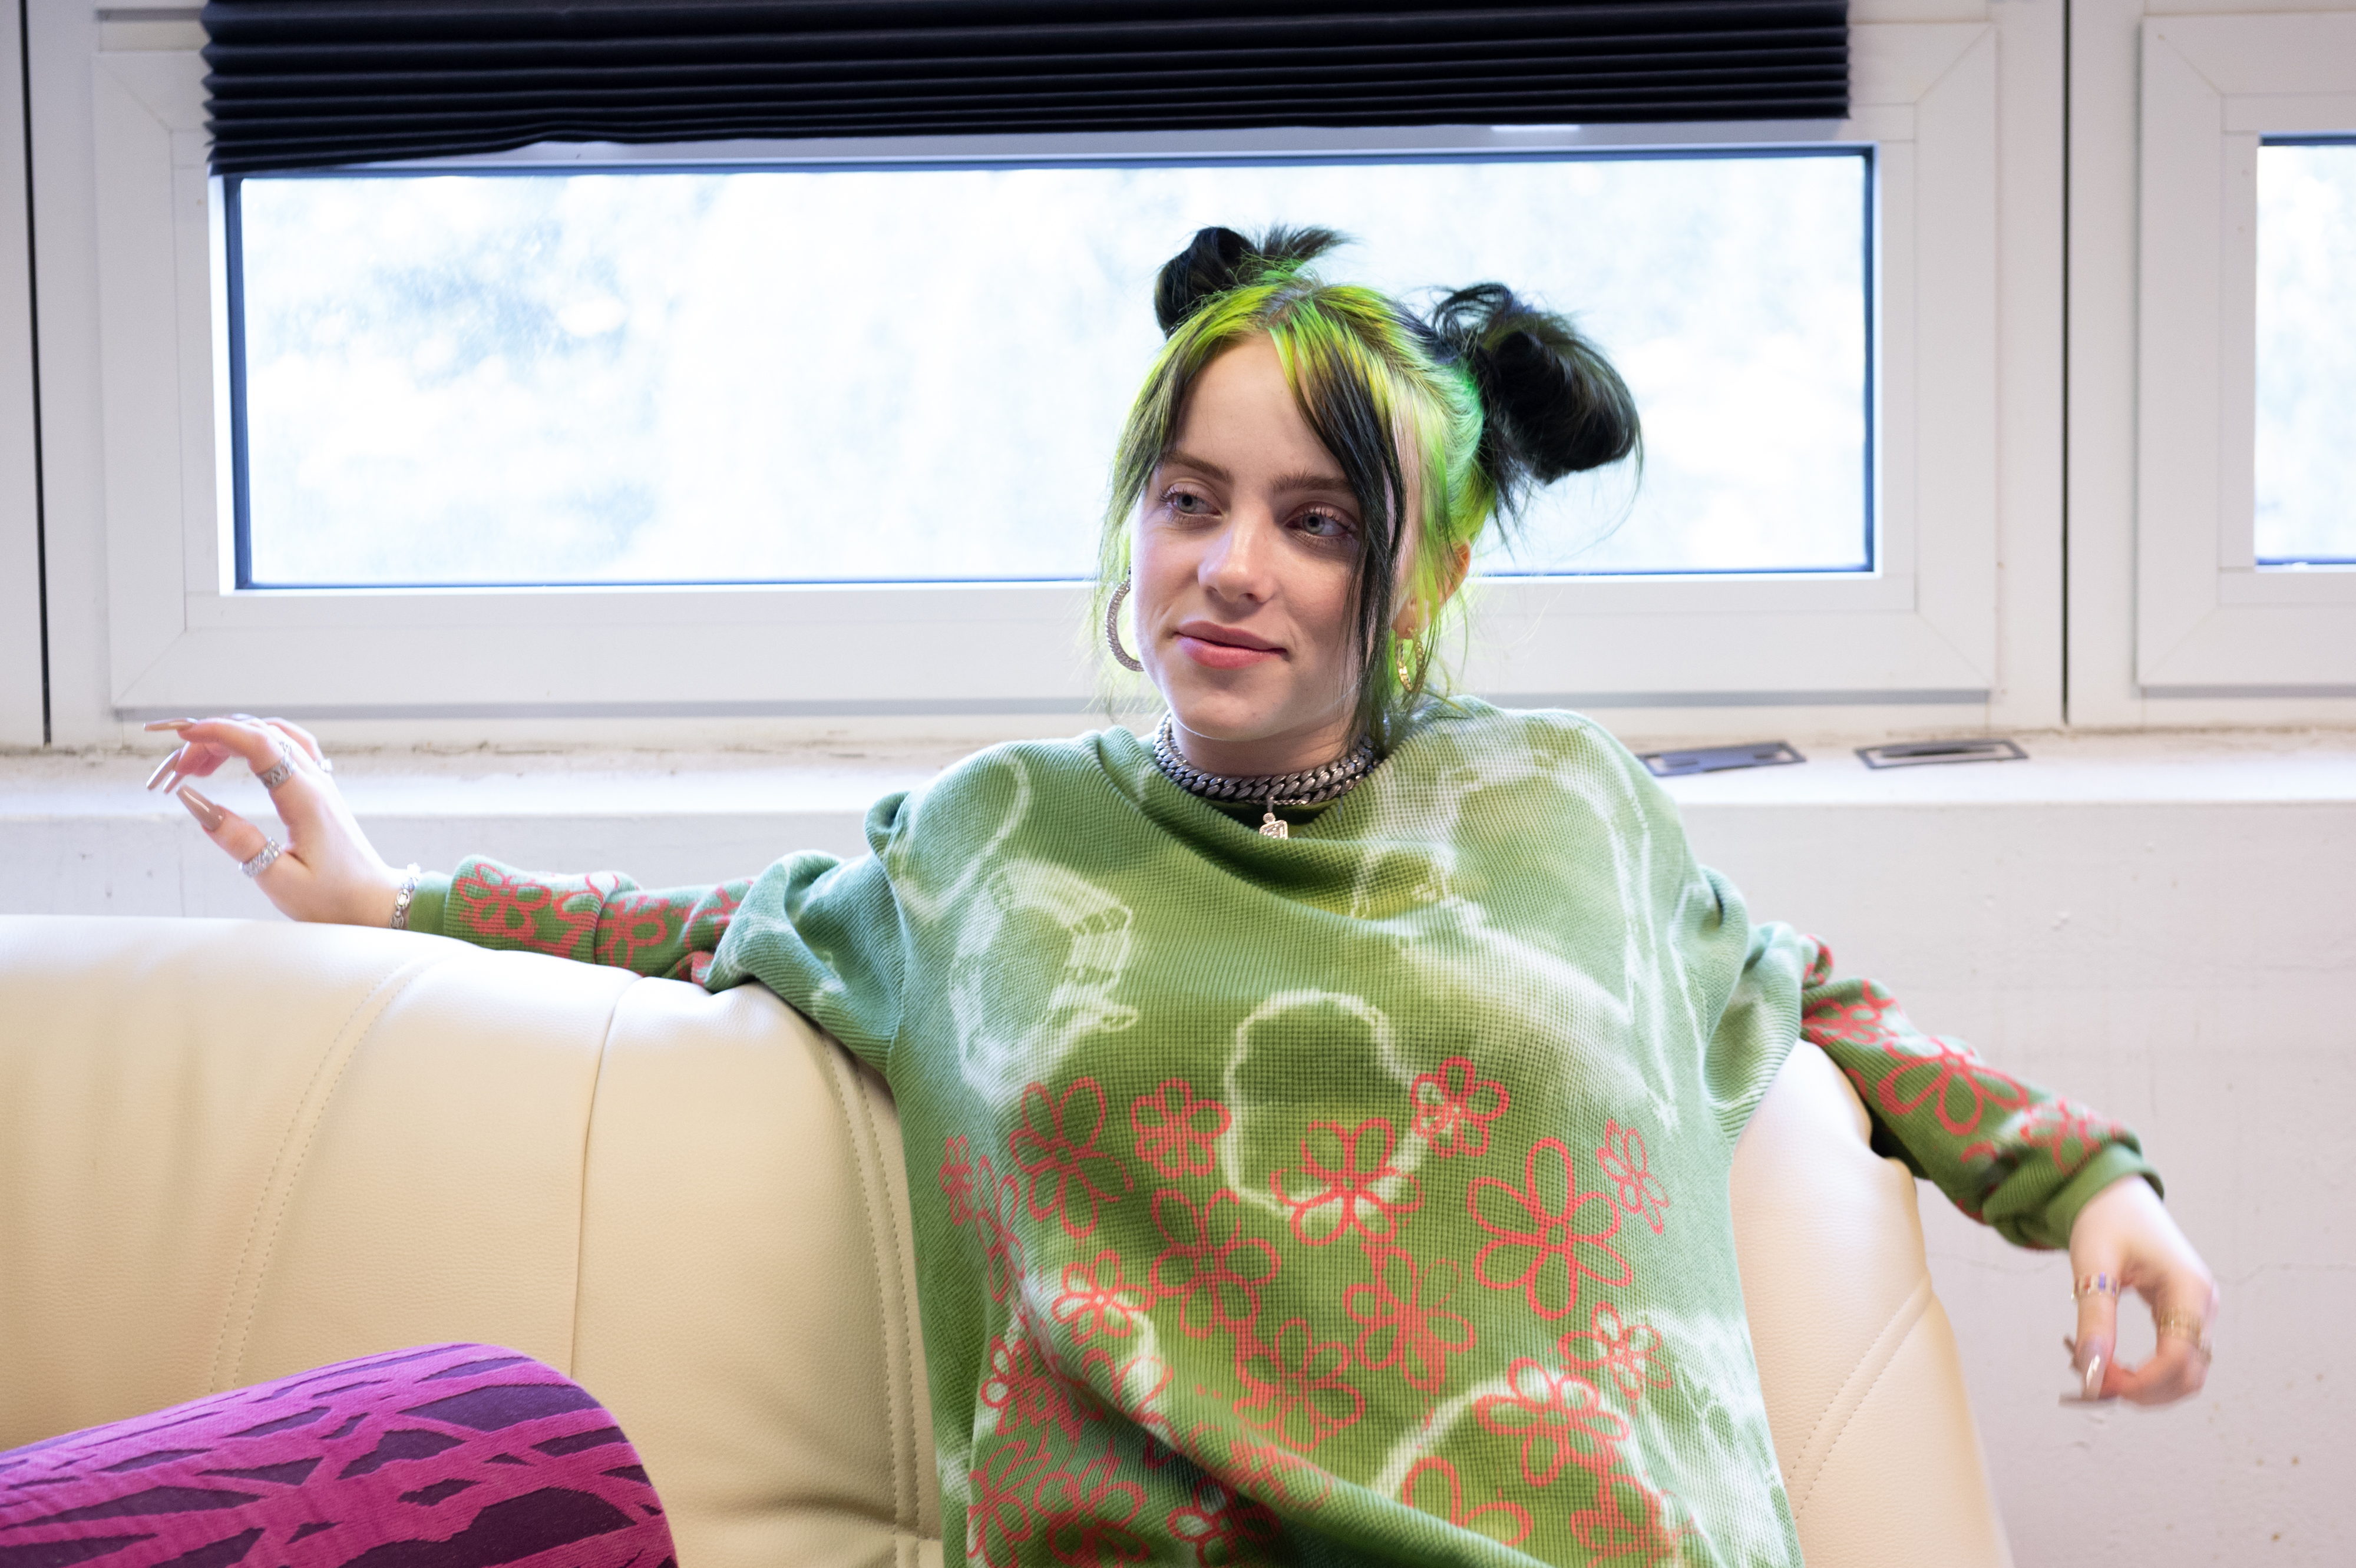 16 August 2019, Hamburg: The US-American singer Billie Eilish during an interview at the music and art festival "MS Dockville". Eilish was one of the stars at the three-day festival in the Wilhelmsburg district. Photo: Jonas Walzberg/dpa (Photo by Jonas Walzberg/picture alliance via Getty Images) (picture alliance&mdash;picture alliance via Getty Image)